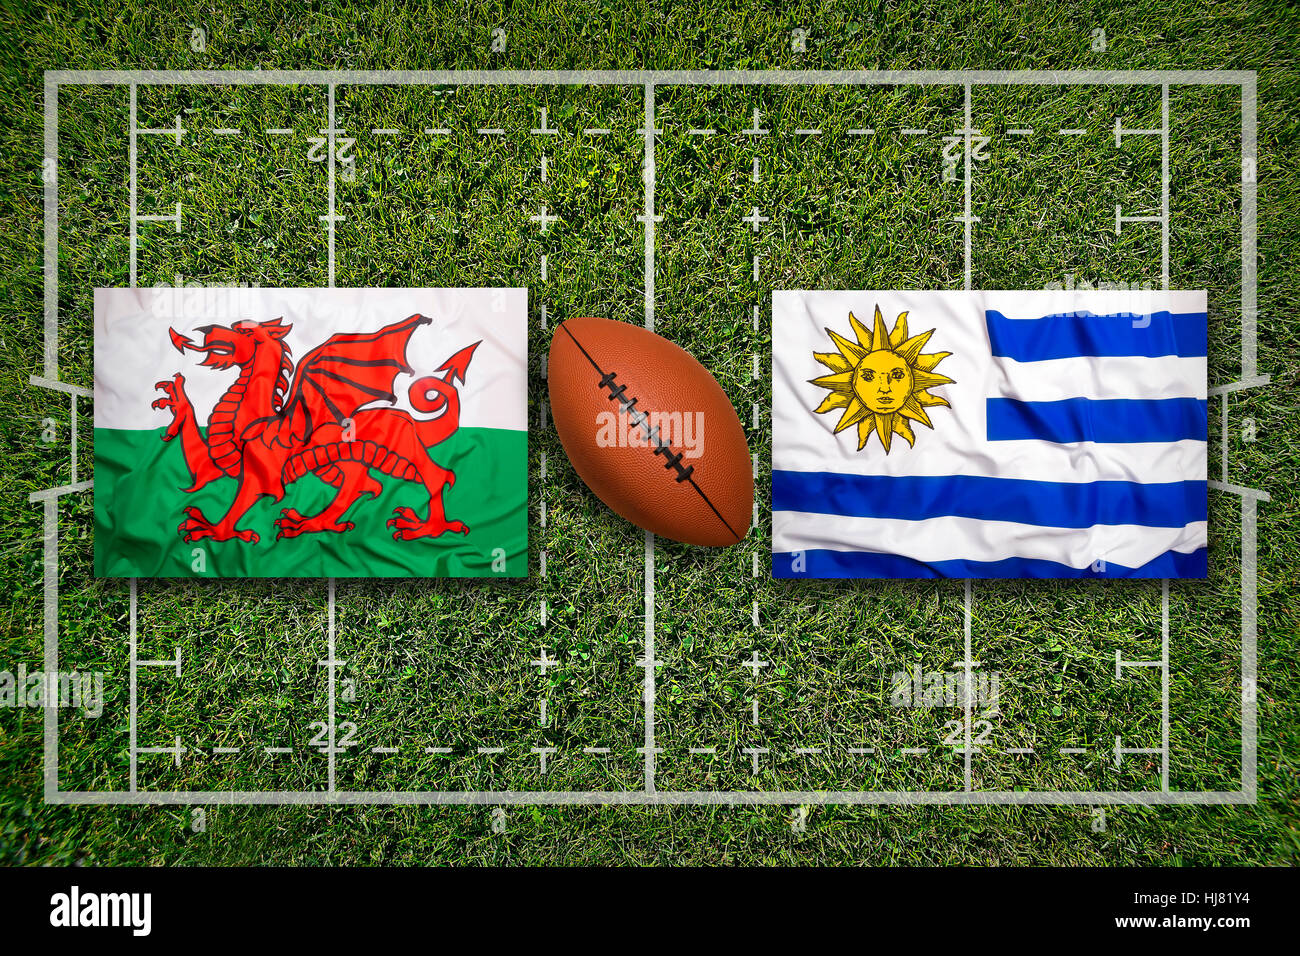 Wales vs. Uruguay flags on green rugby field Stock Photo